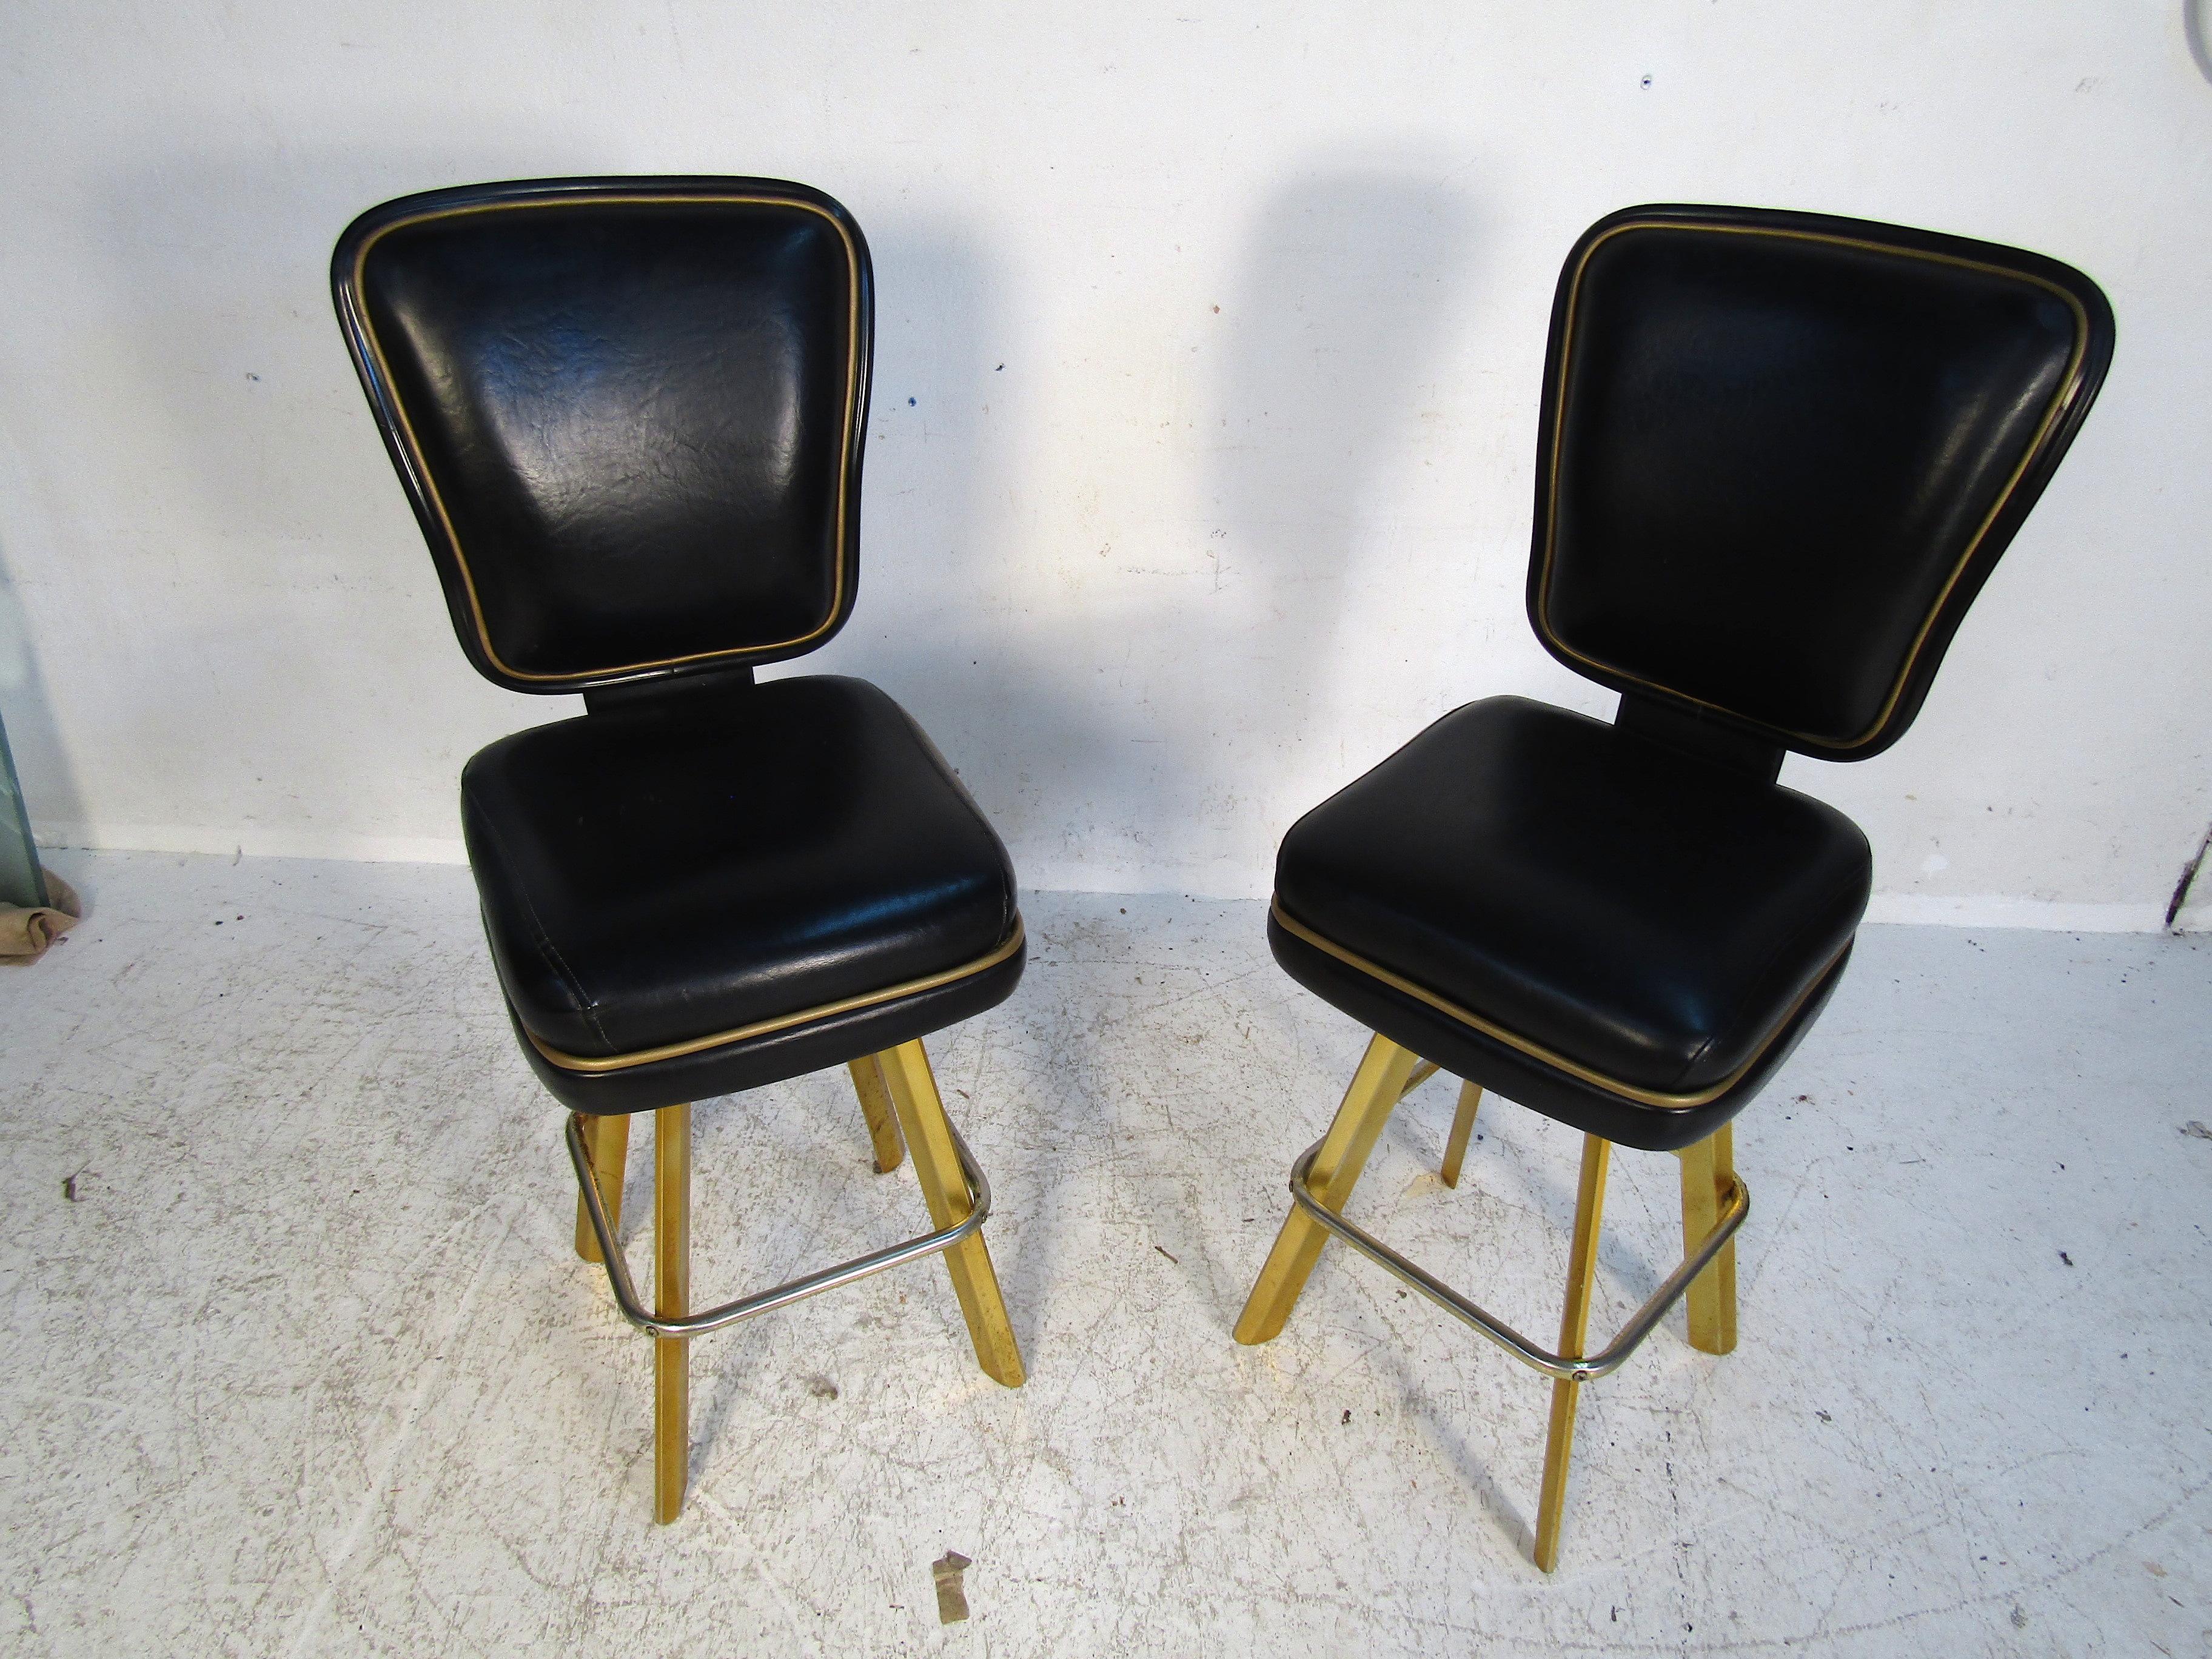 Brass Pair of Trump Plaza Bar Stools For Sale